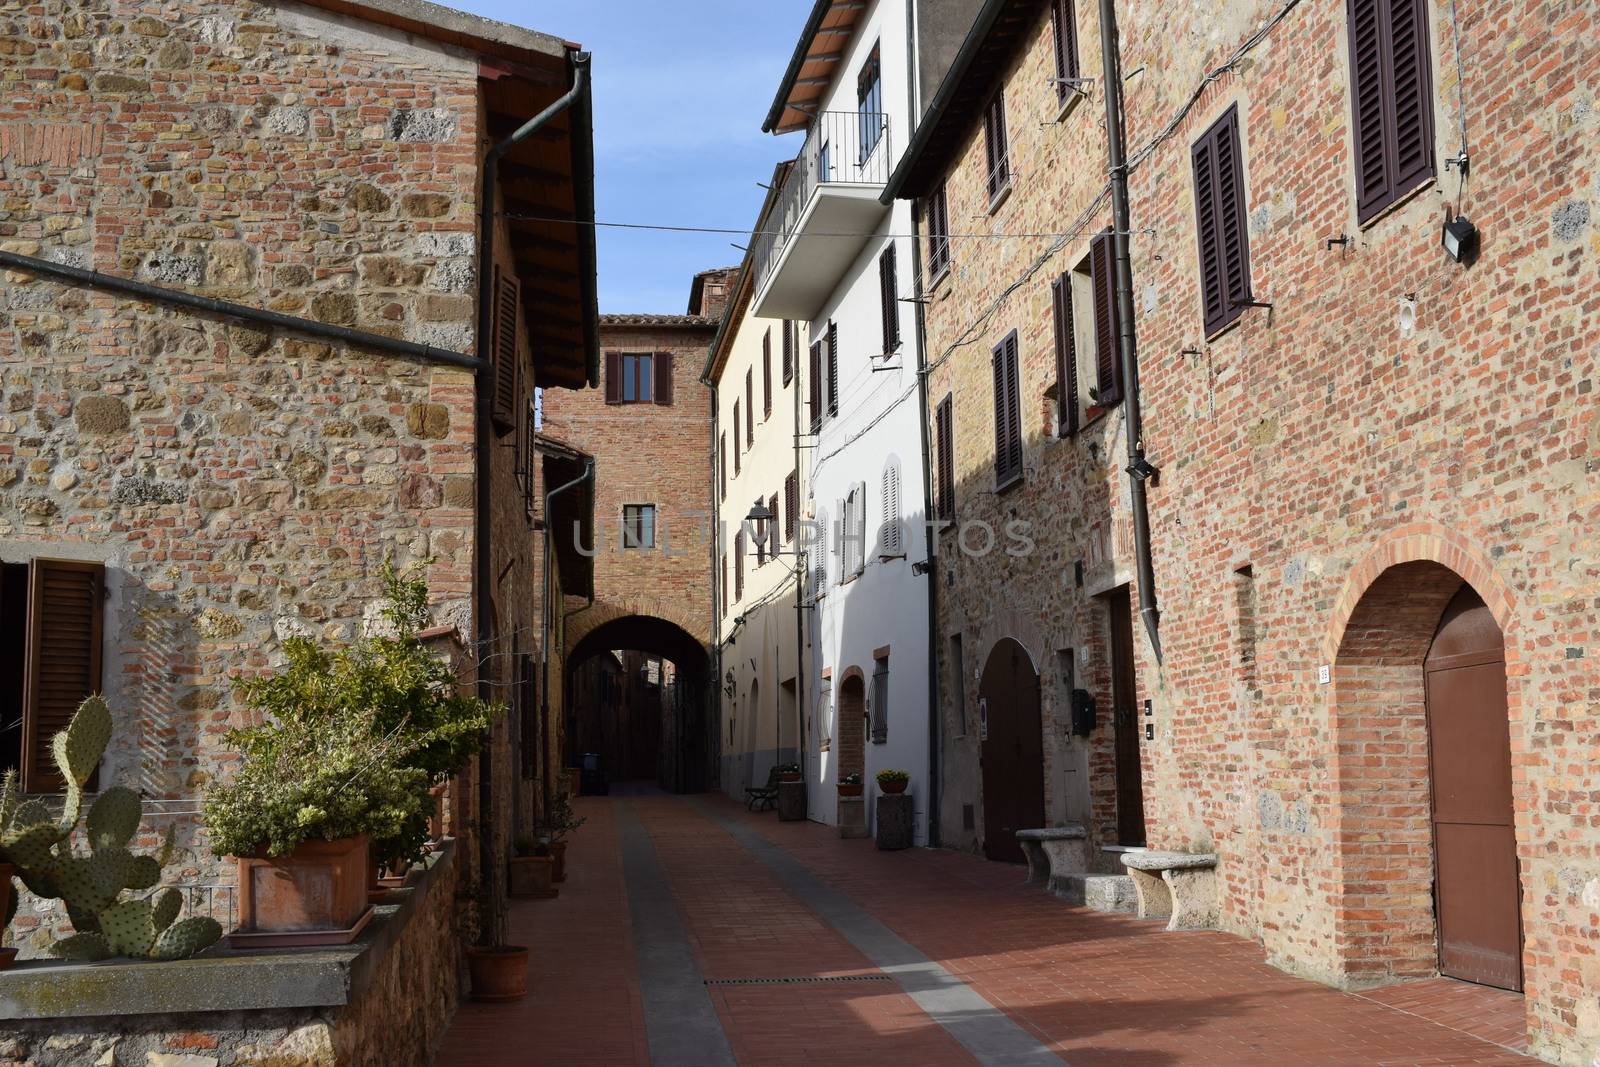 Colle Val D'Elsa - Streets in the old town of the beautiful medieval town in Tuscany (Italy) near to Siena